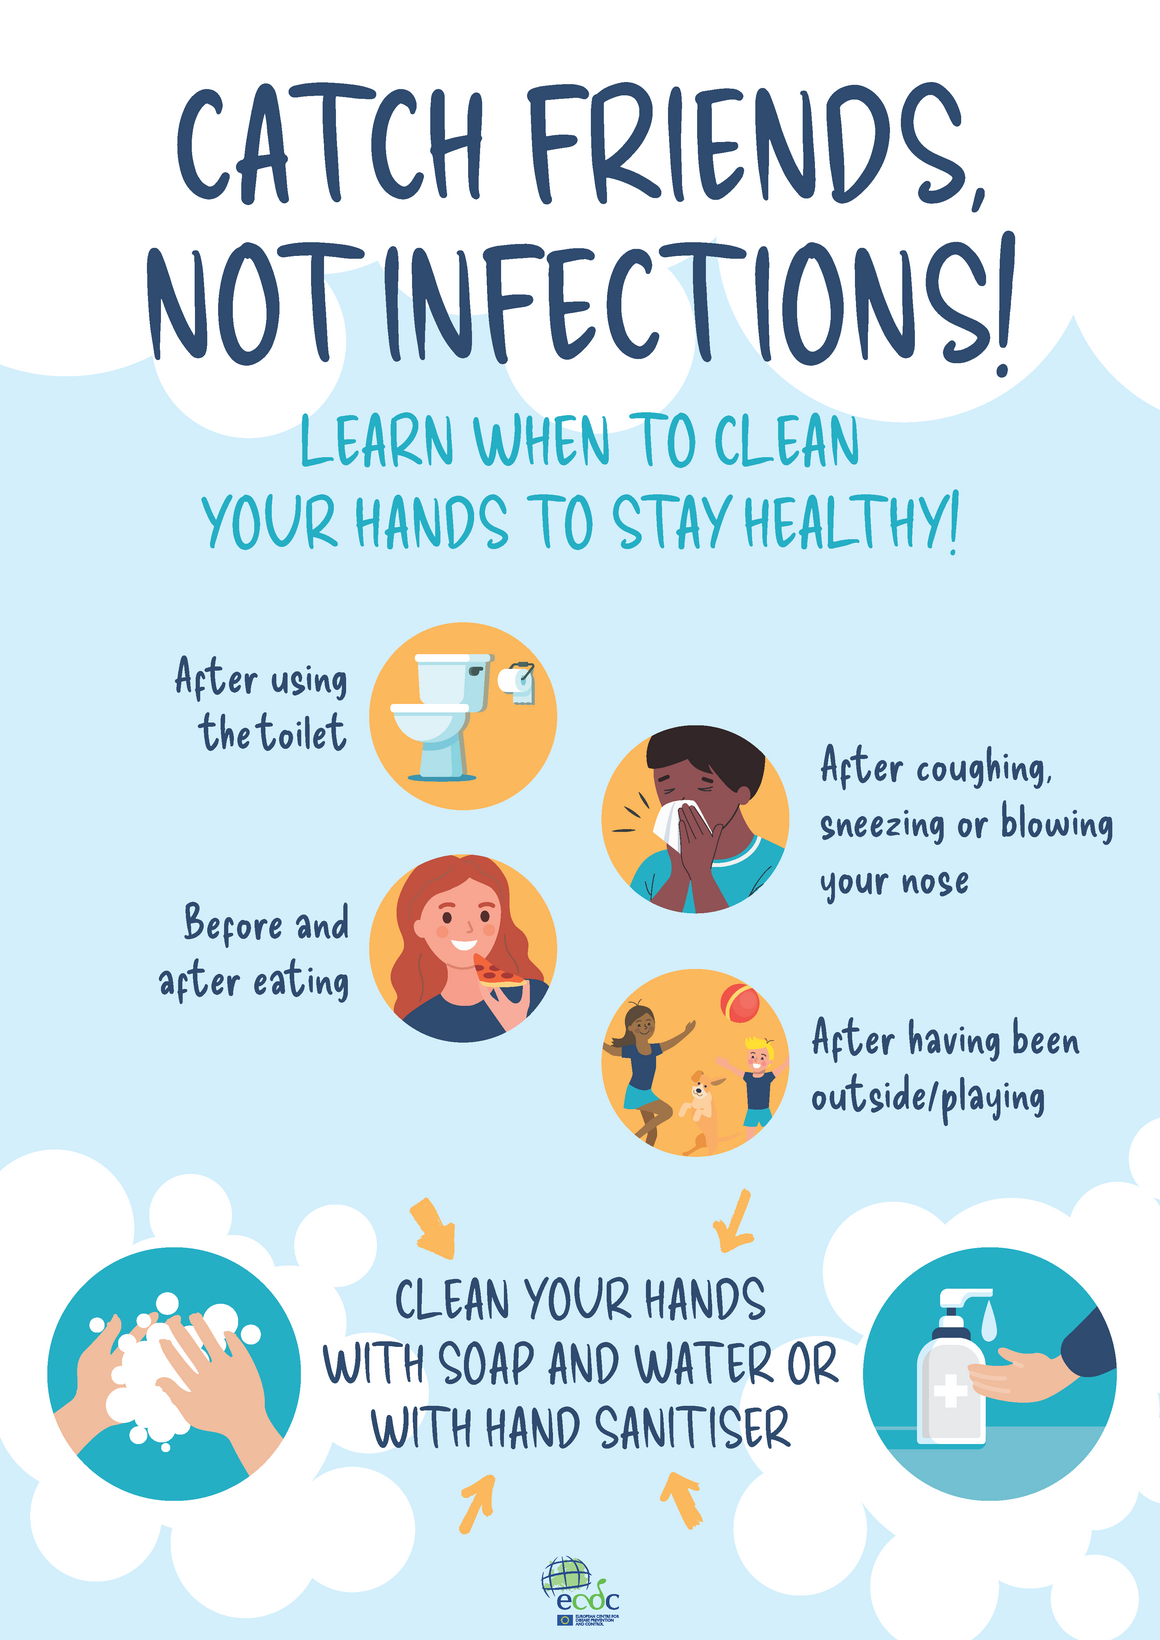 Catch friends not infections